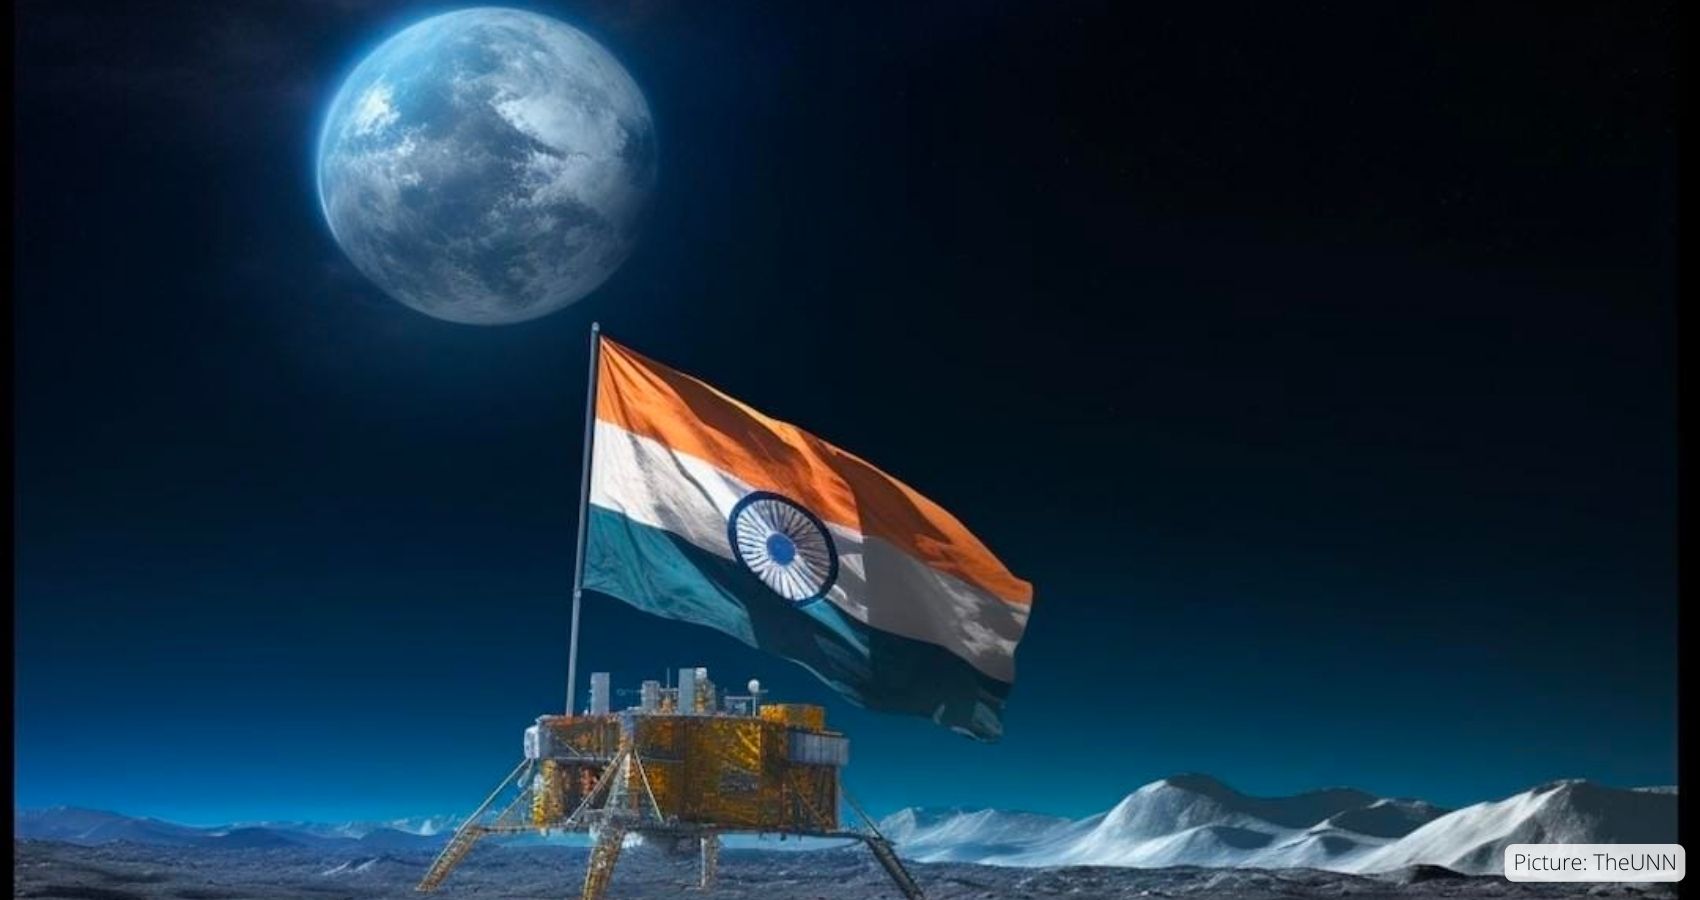 India, 4th Country Ever To Land A Spacecraft On The Moon